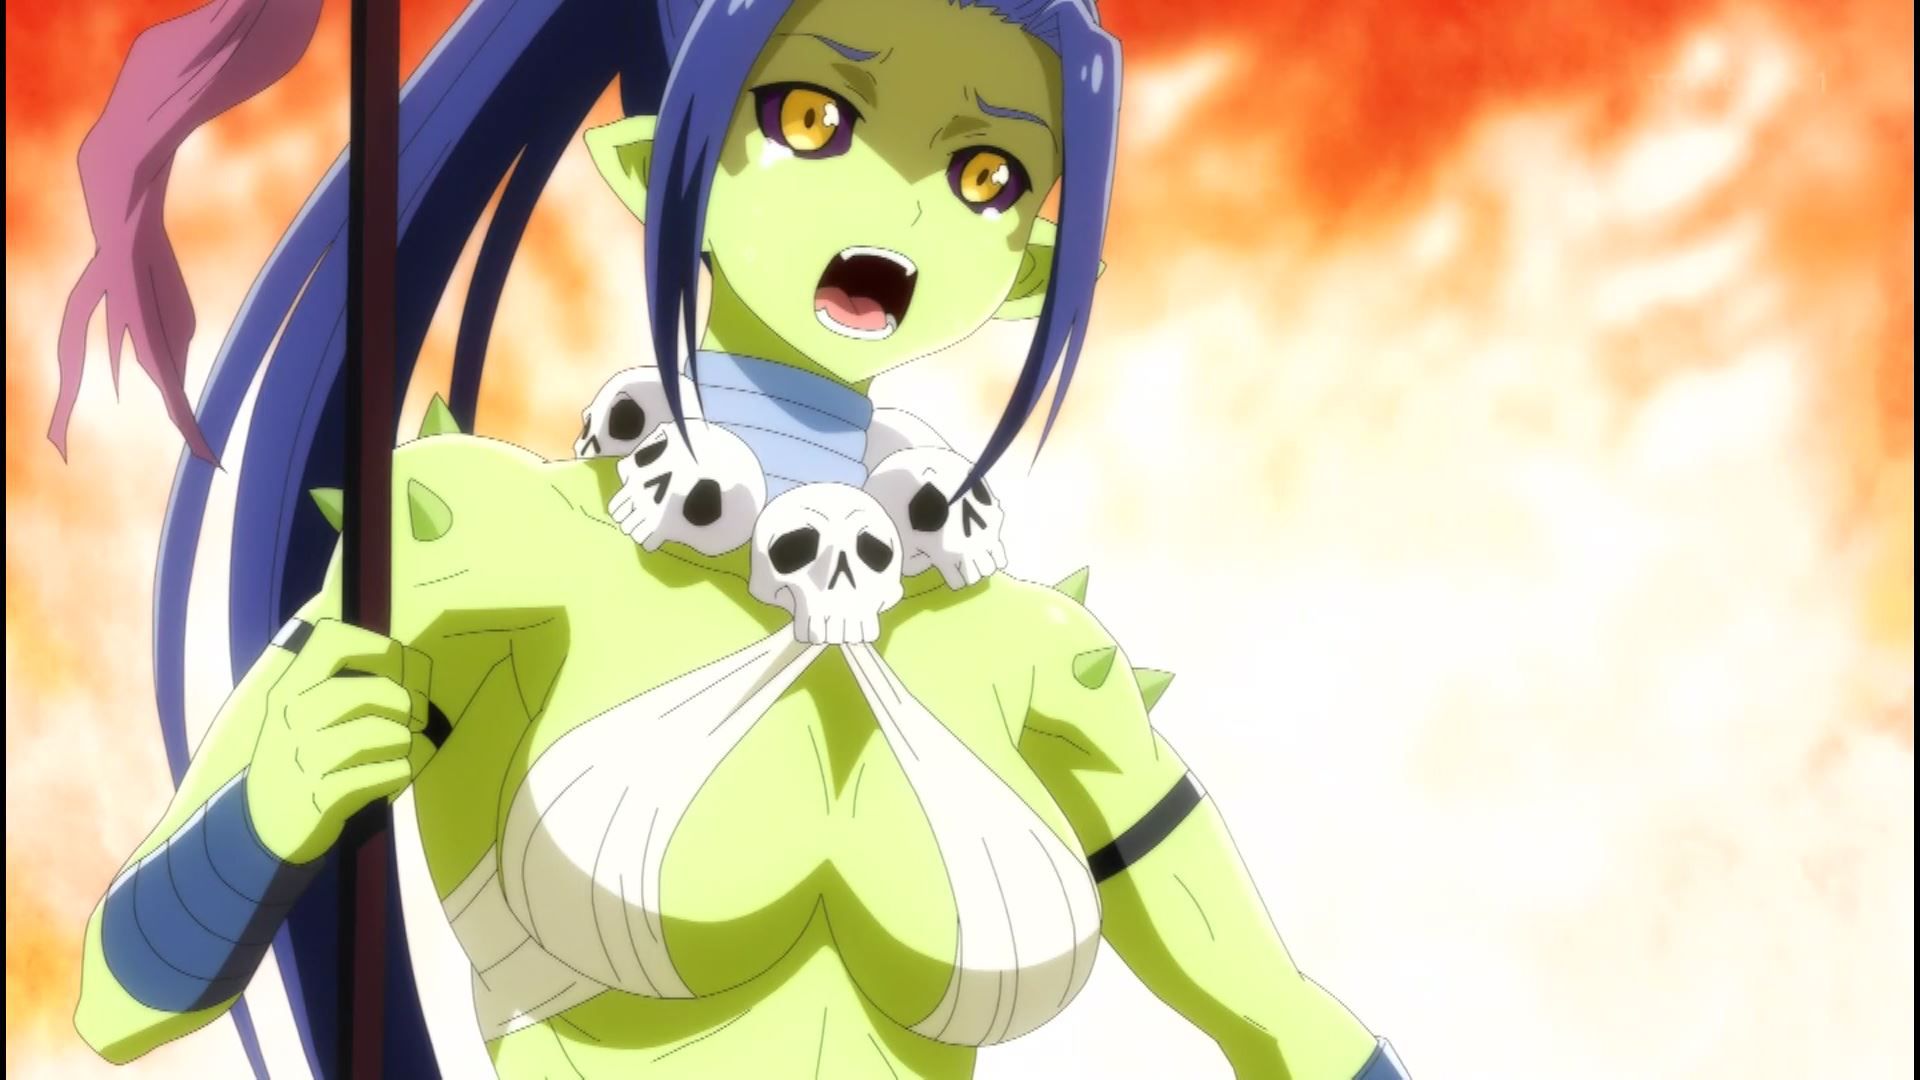 The goblin girl and ecchi scene that got estrus in episode 2 of the second season of the anime "Peter Grill and the Time of the Wise"! 5